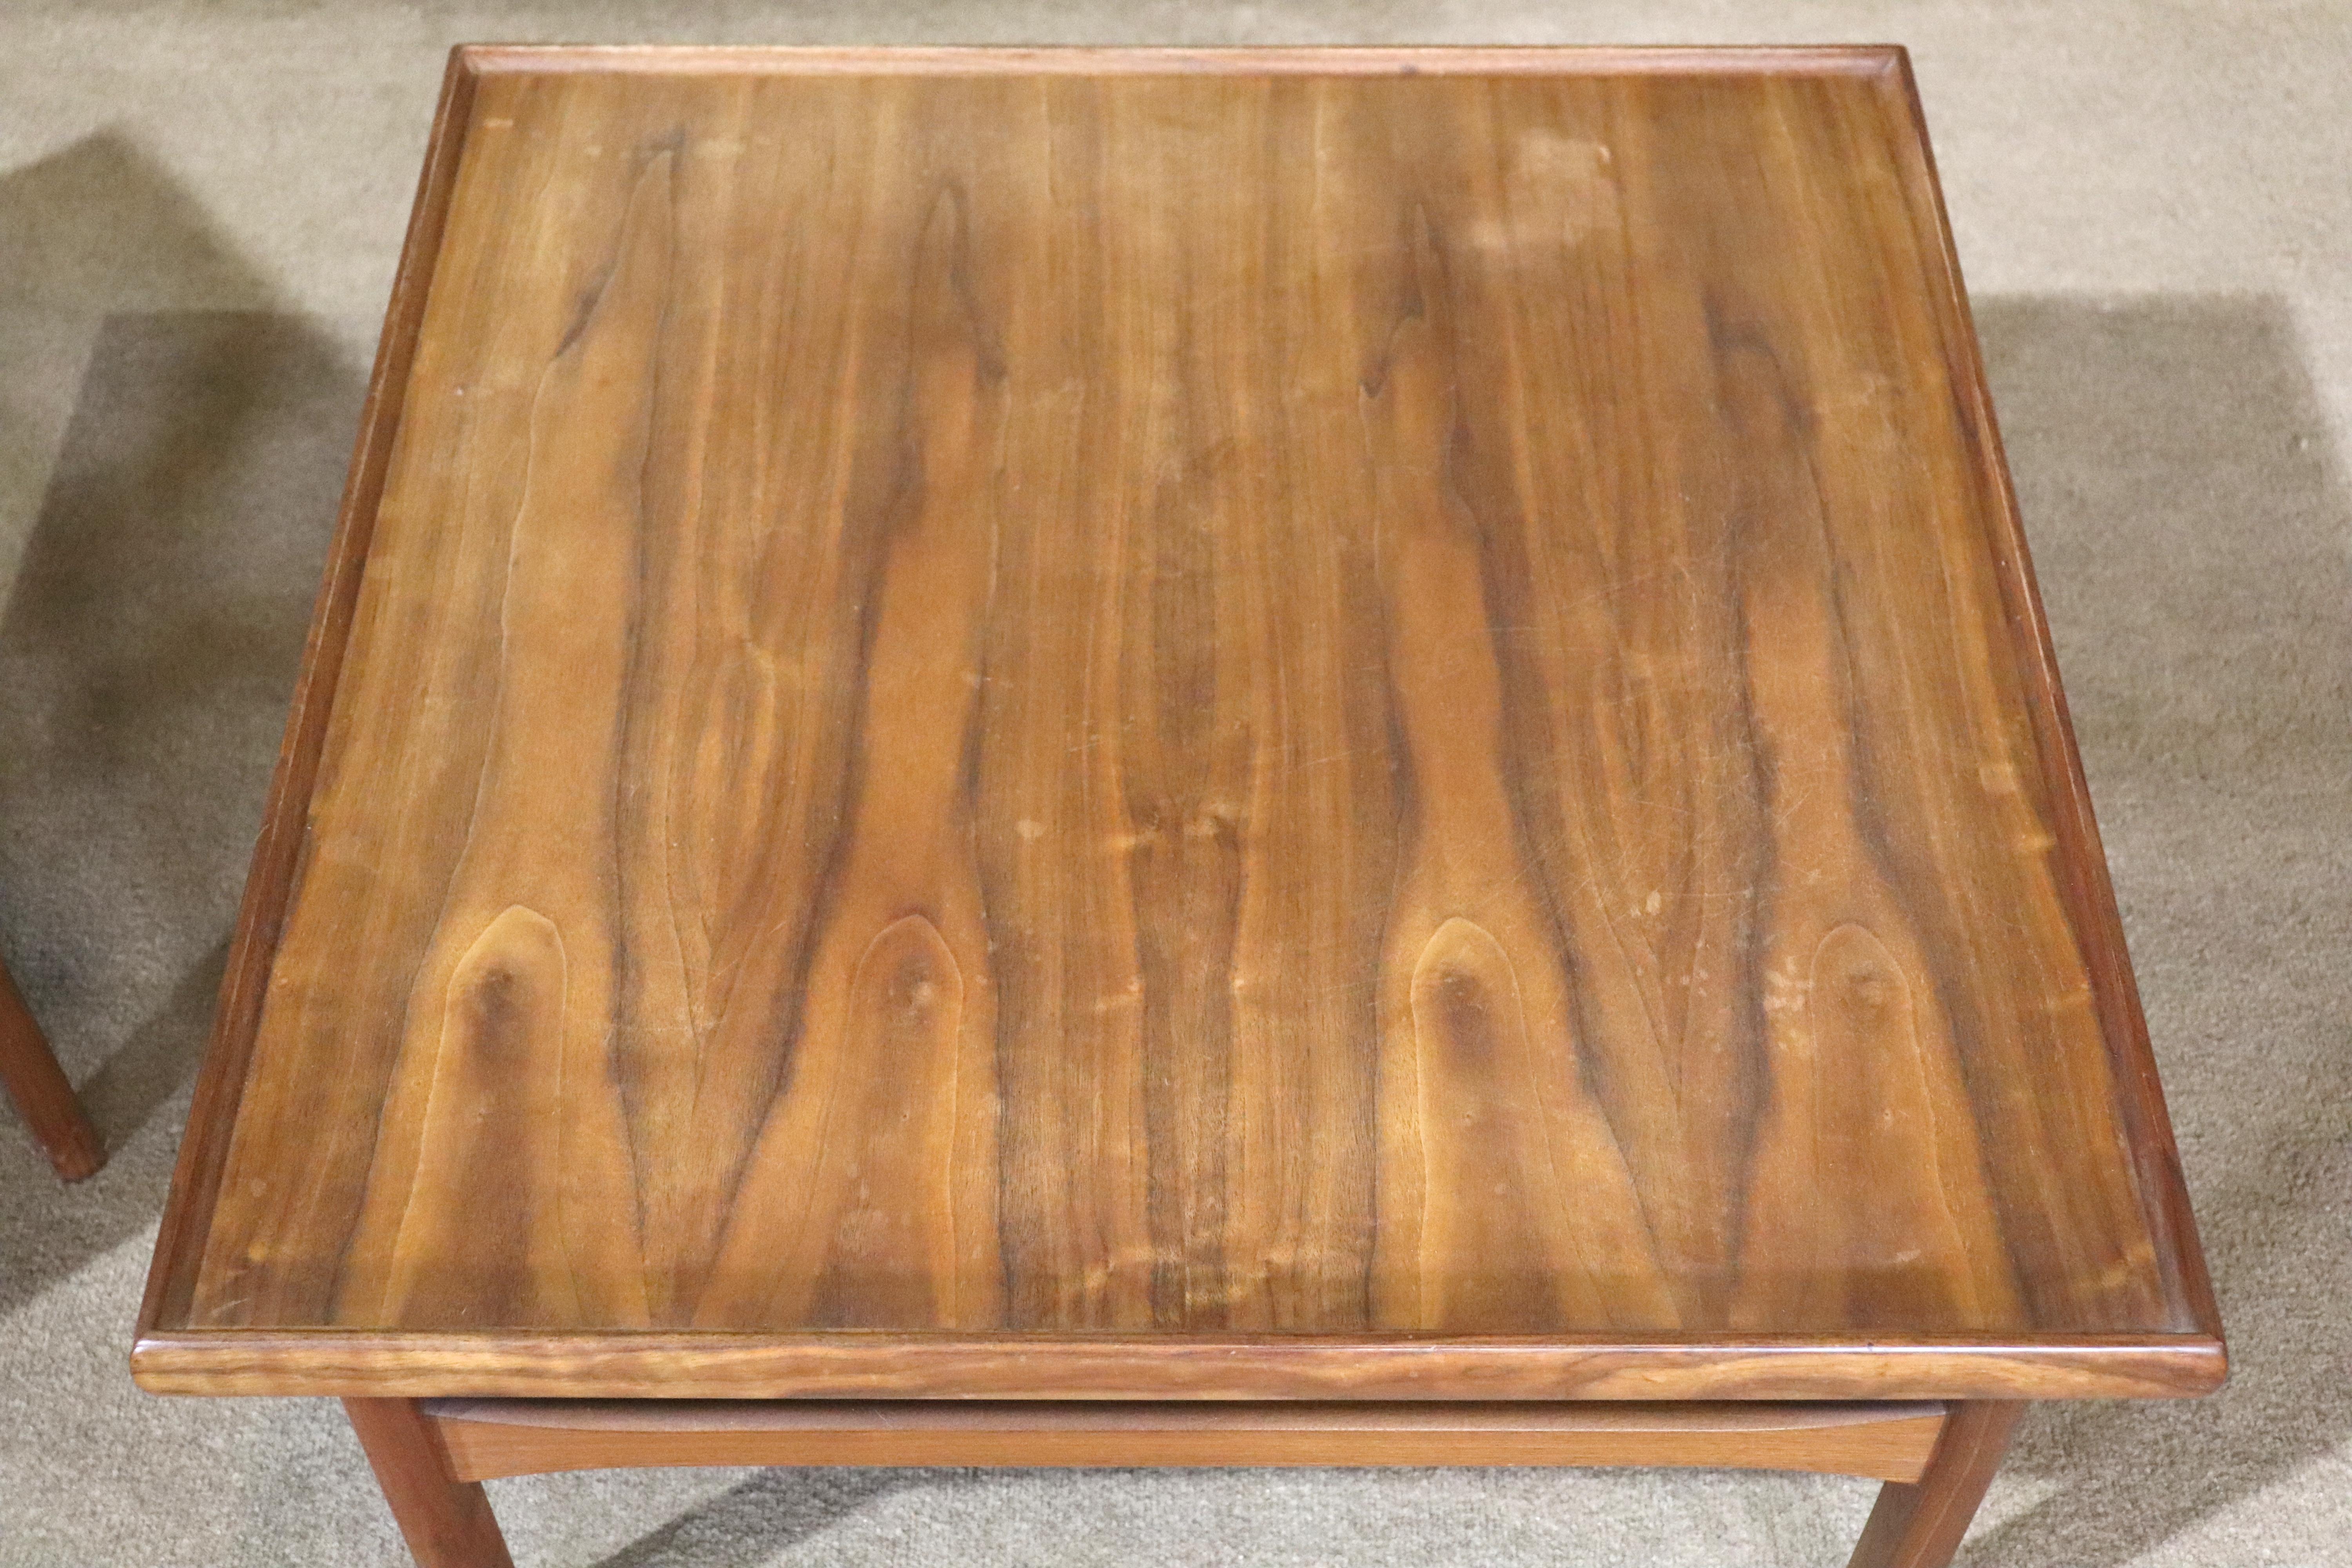 Square teak table by Moreddi. Simple Danish design with turned edges and wood stretchers.
Please confirm location NY or NJ